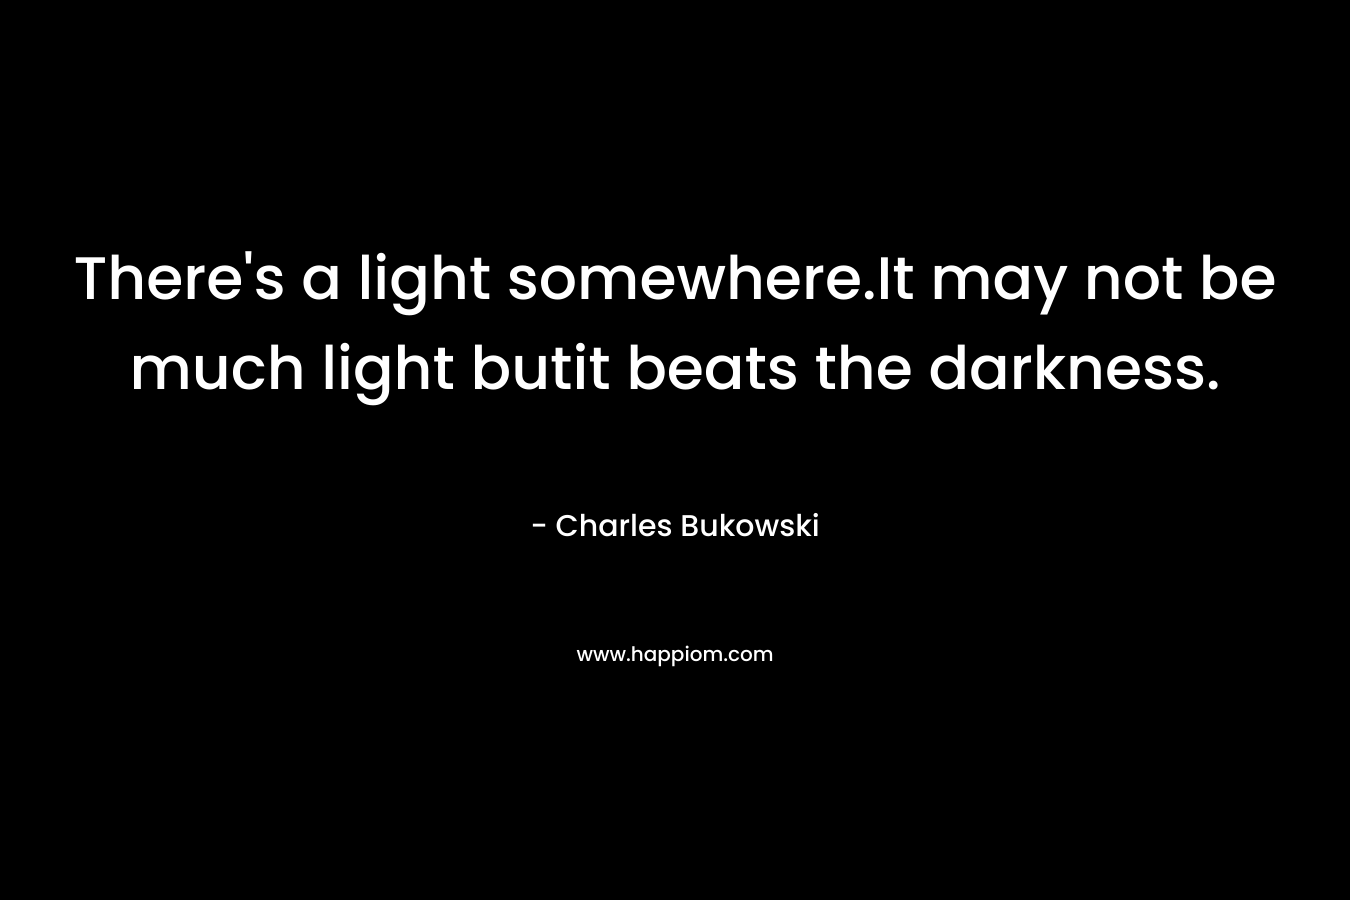 There's a light somewhere.It may not be much light butit beats the darkness.